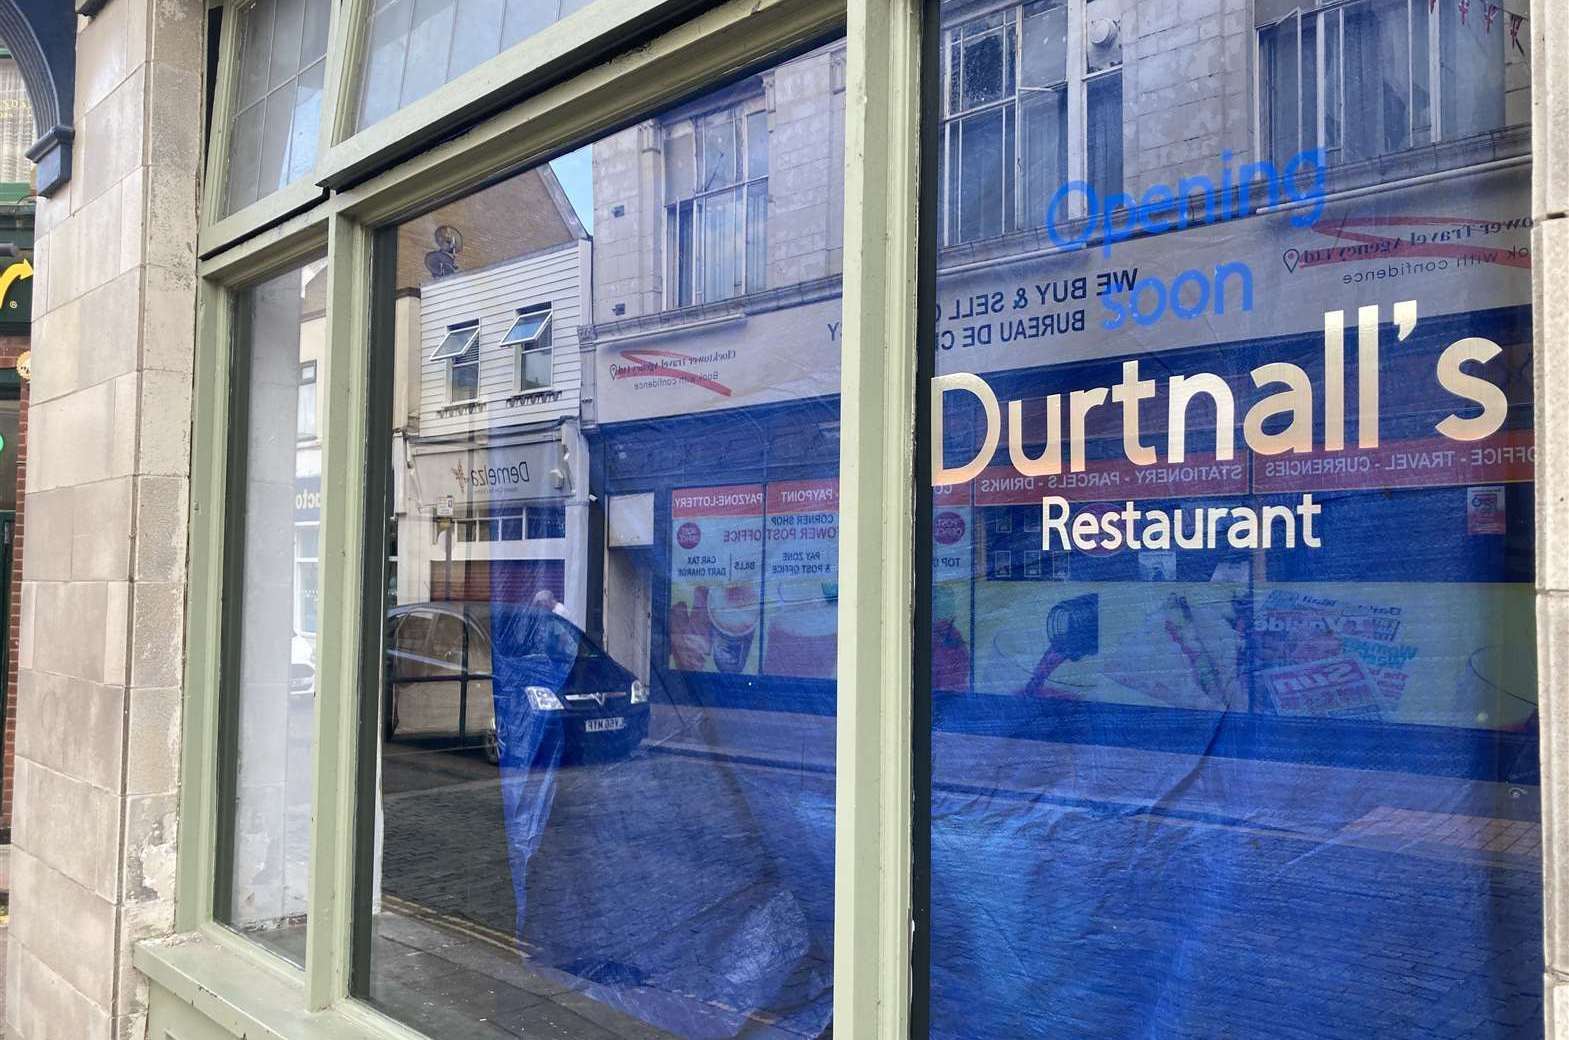 Durtnall's was the previous restaurant at the Sheerness site